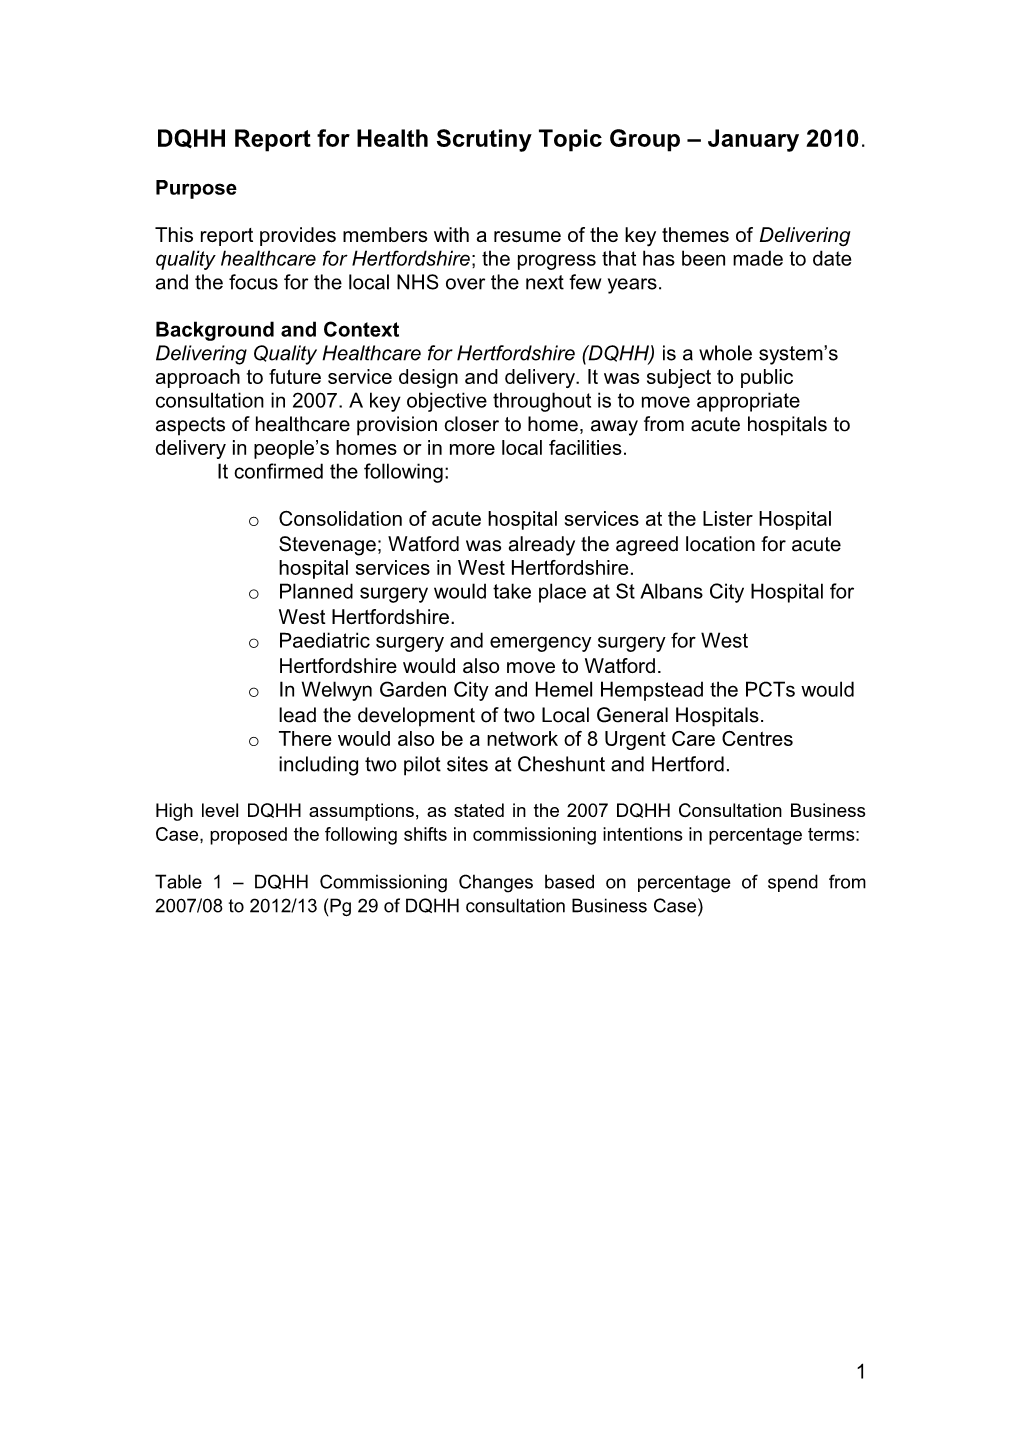 DQHH Report for Health Scrutiny Topic Group January 2010